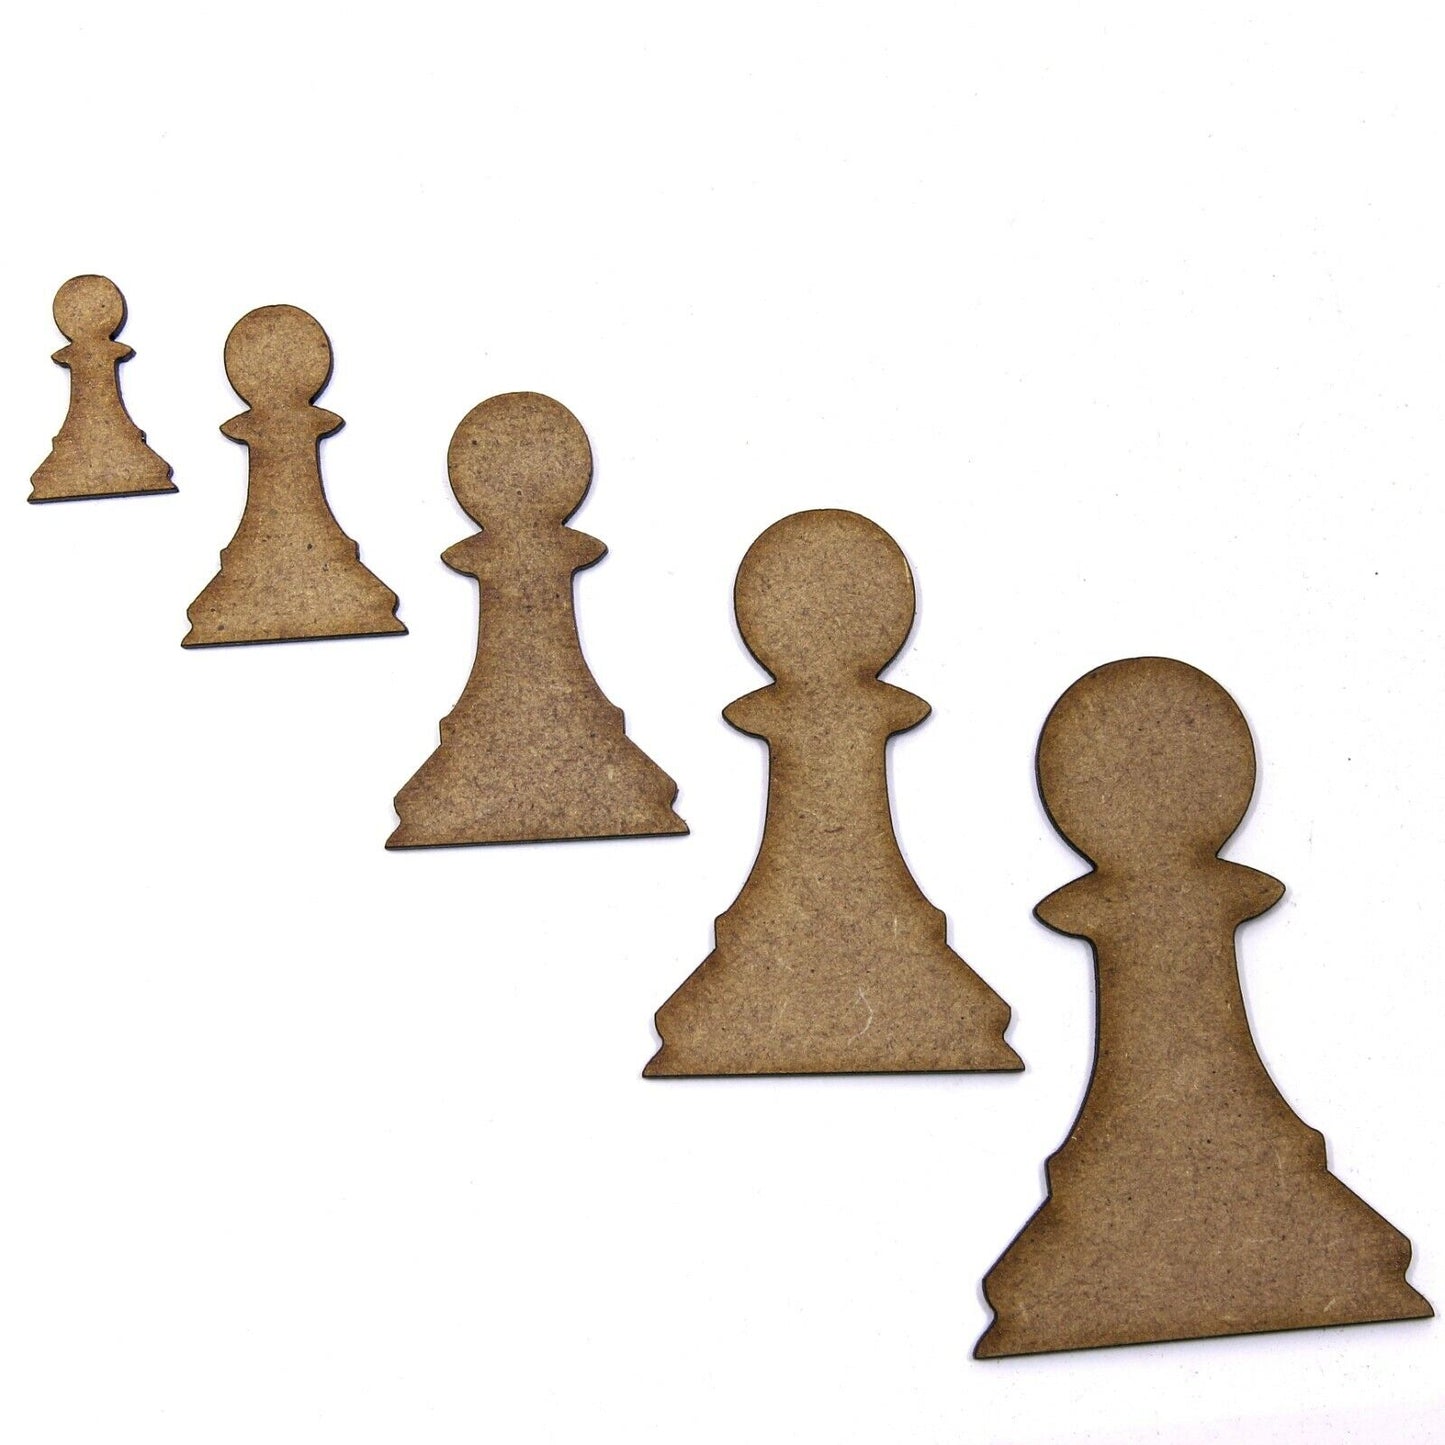 Pawn Chess Piece Craft Shape, Various Sizes, 2mm MDF Wood. Checkmate, board game